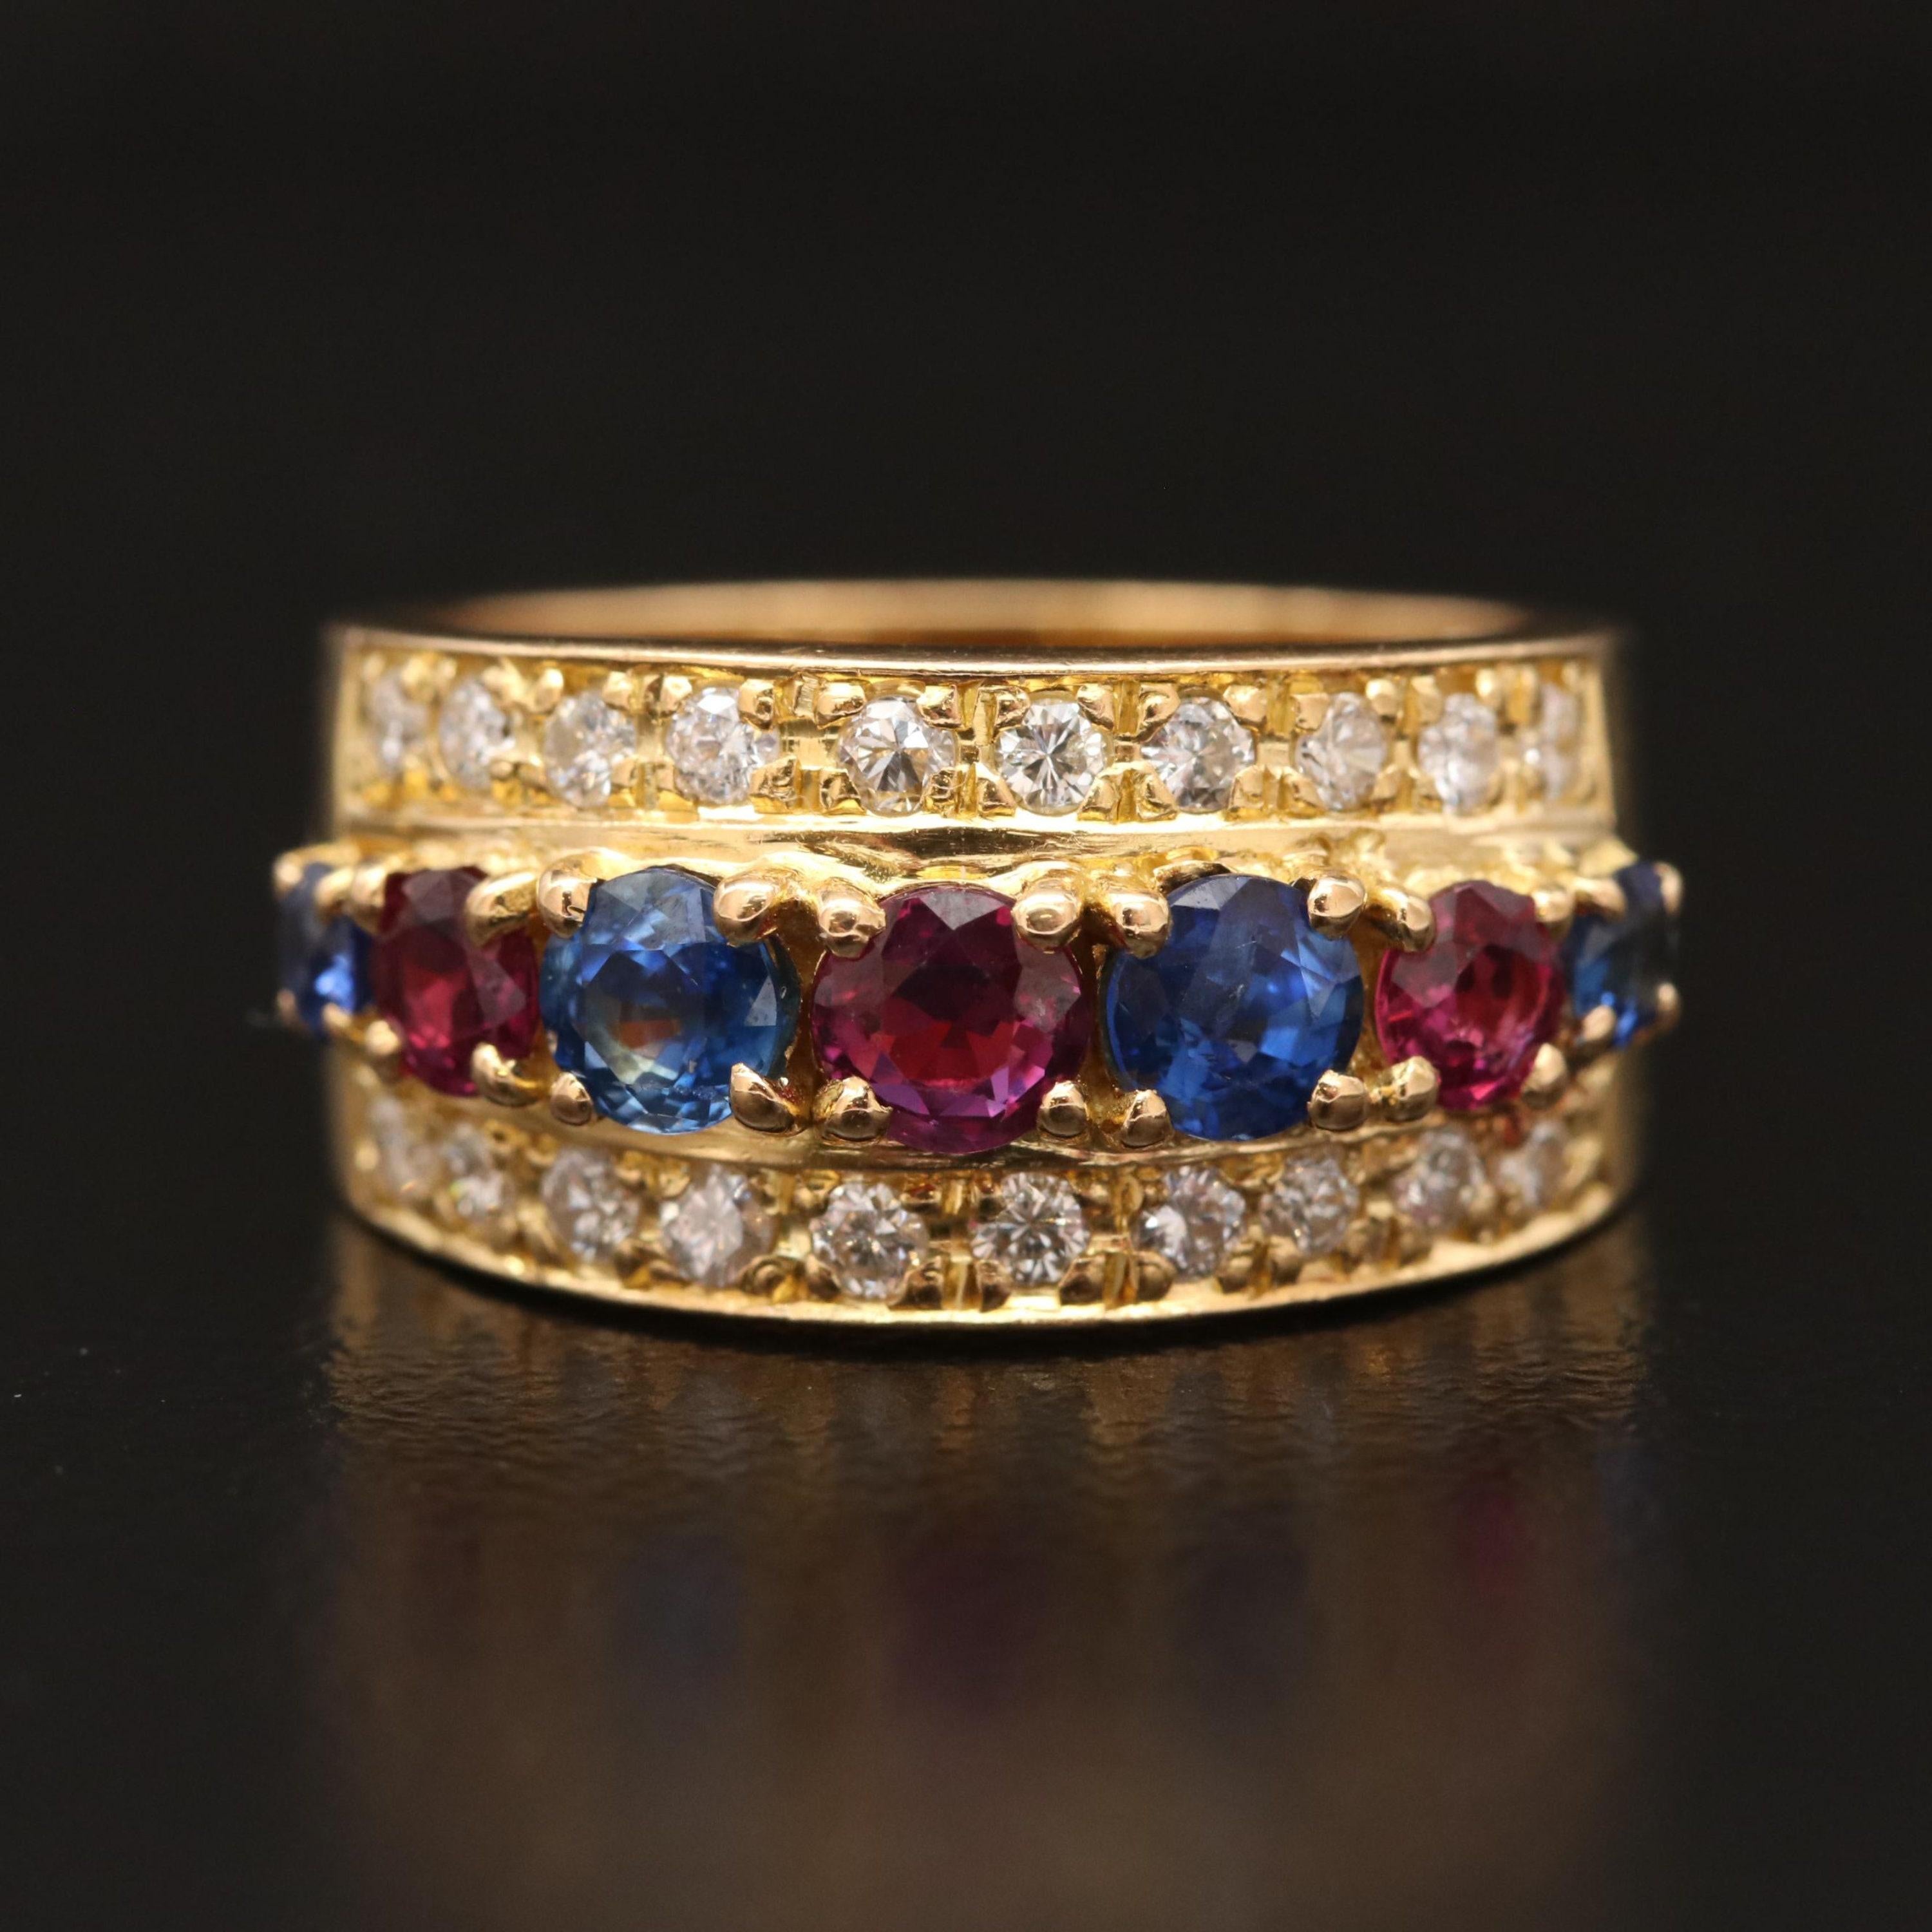 For Sale:  Natural Ruby Sapphire Diamond Engagement Ring Set in 18K Gold, Cocktail Ring 6